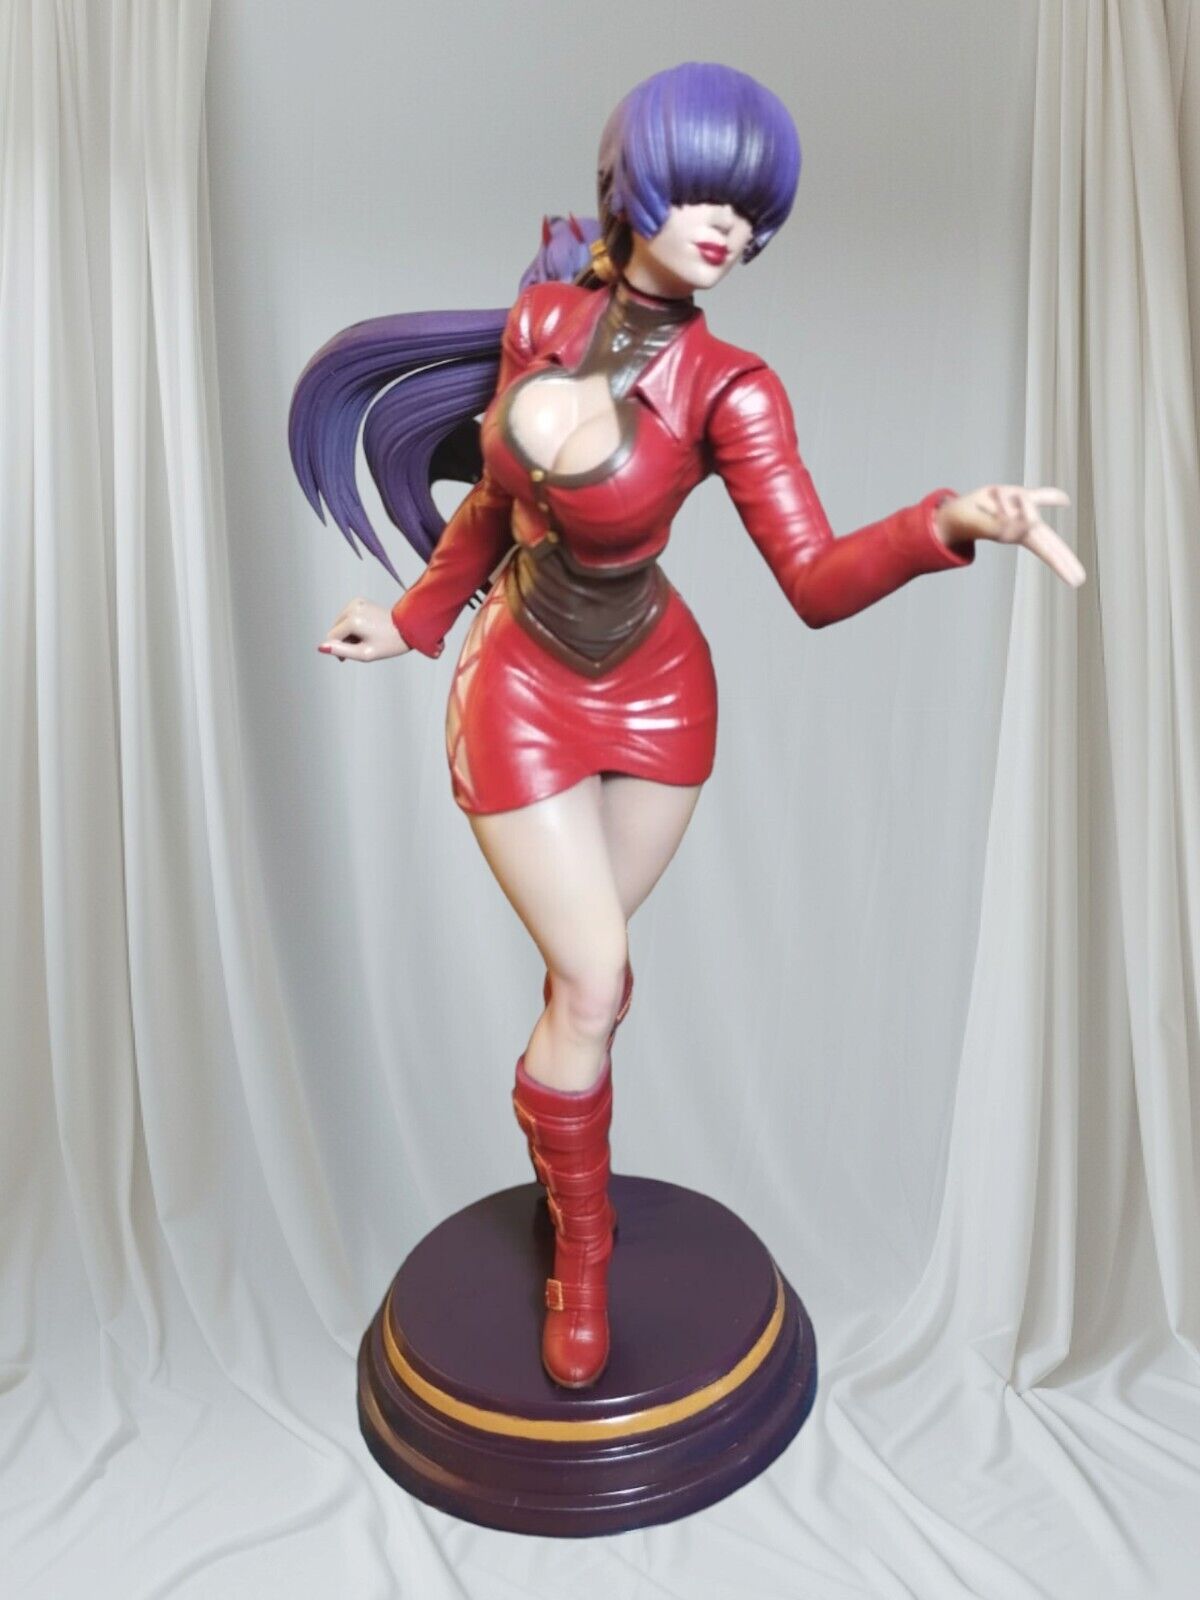 Figura Shermie KOF completely handpainted 25 cm or 9.84 inch inmediate shipping